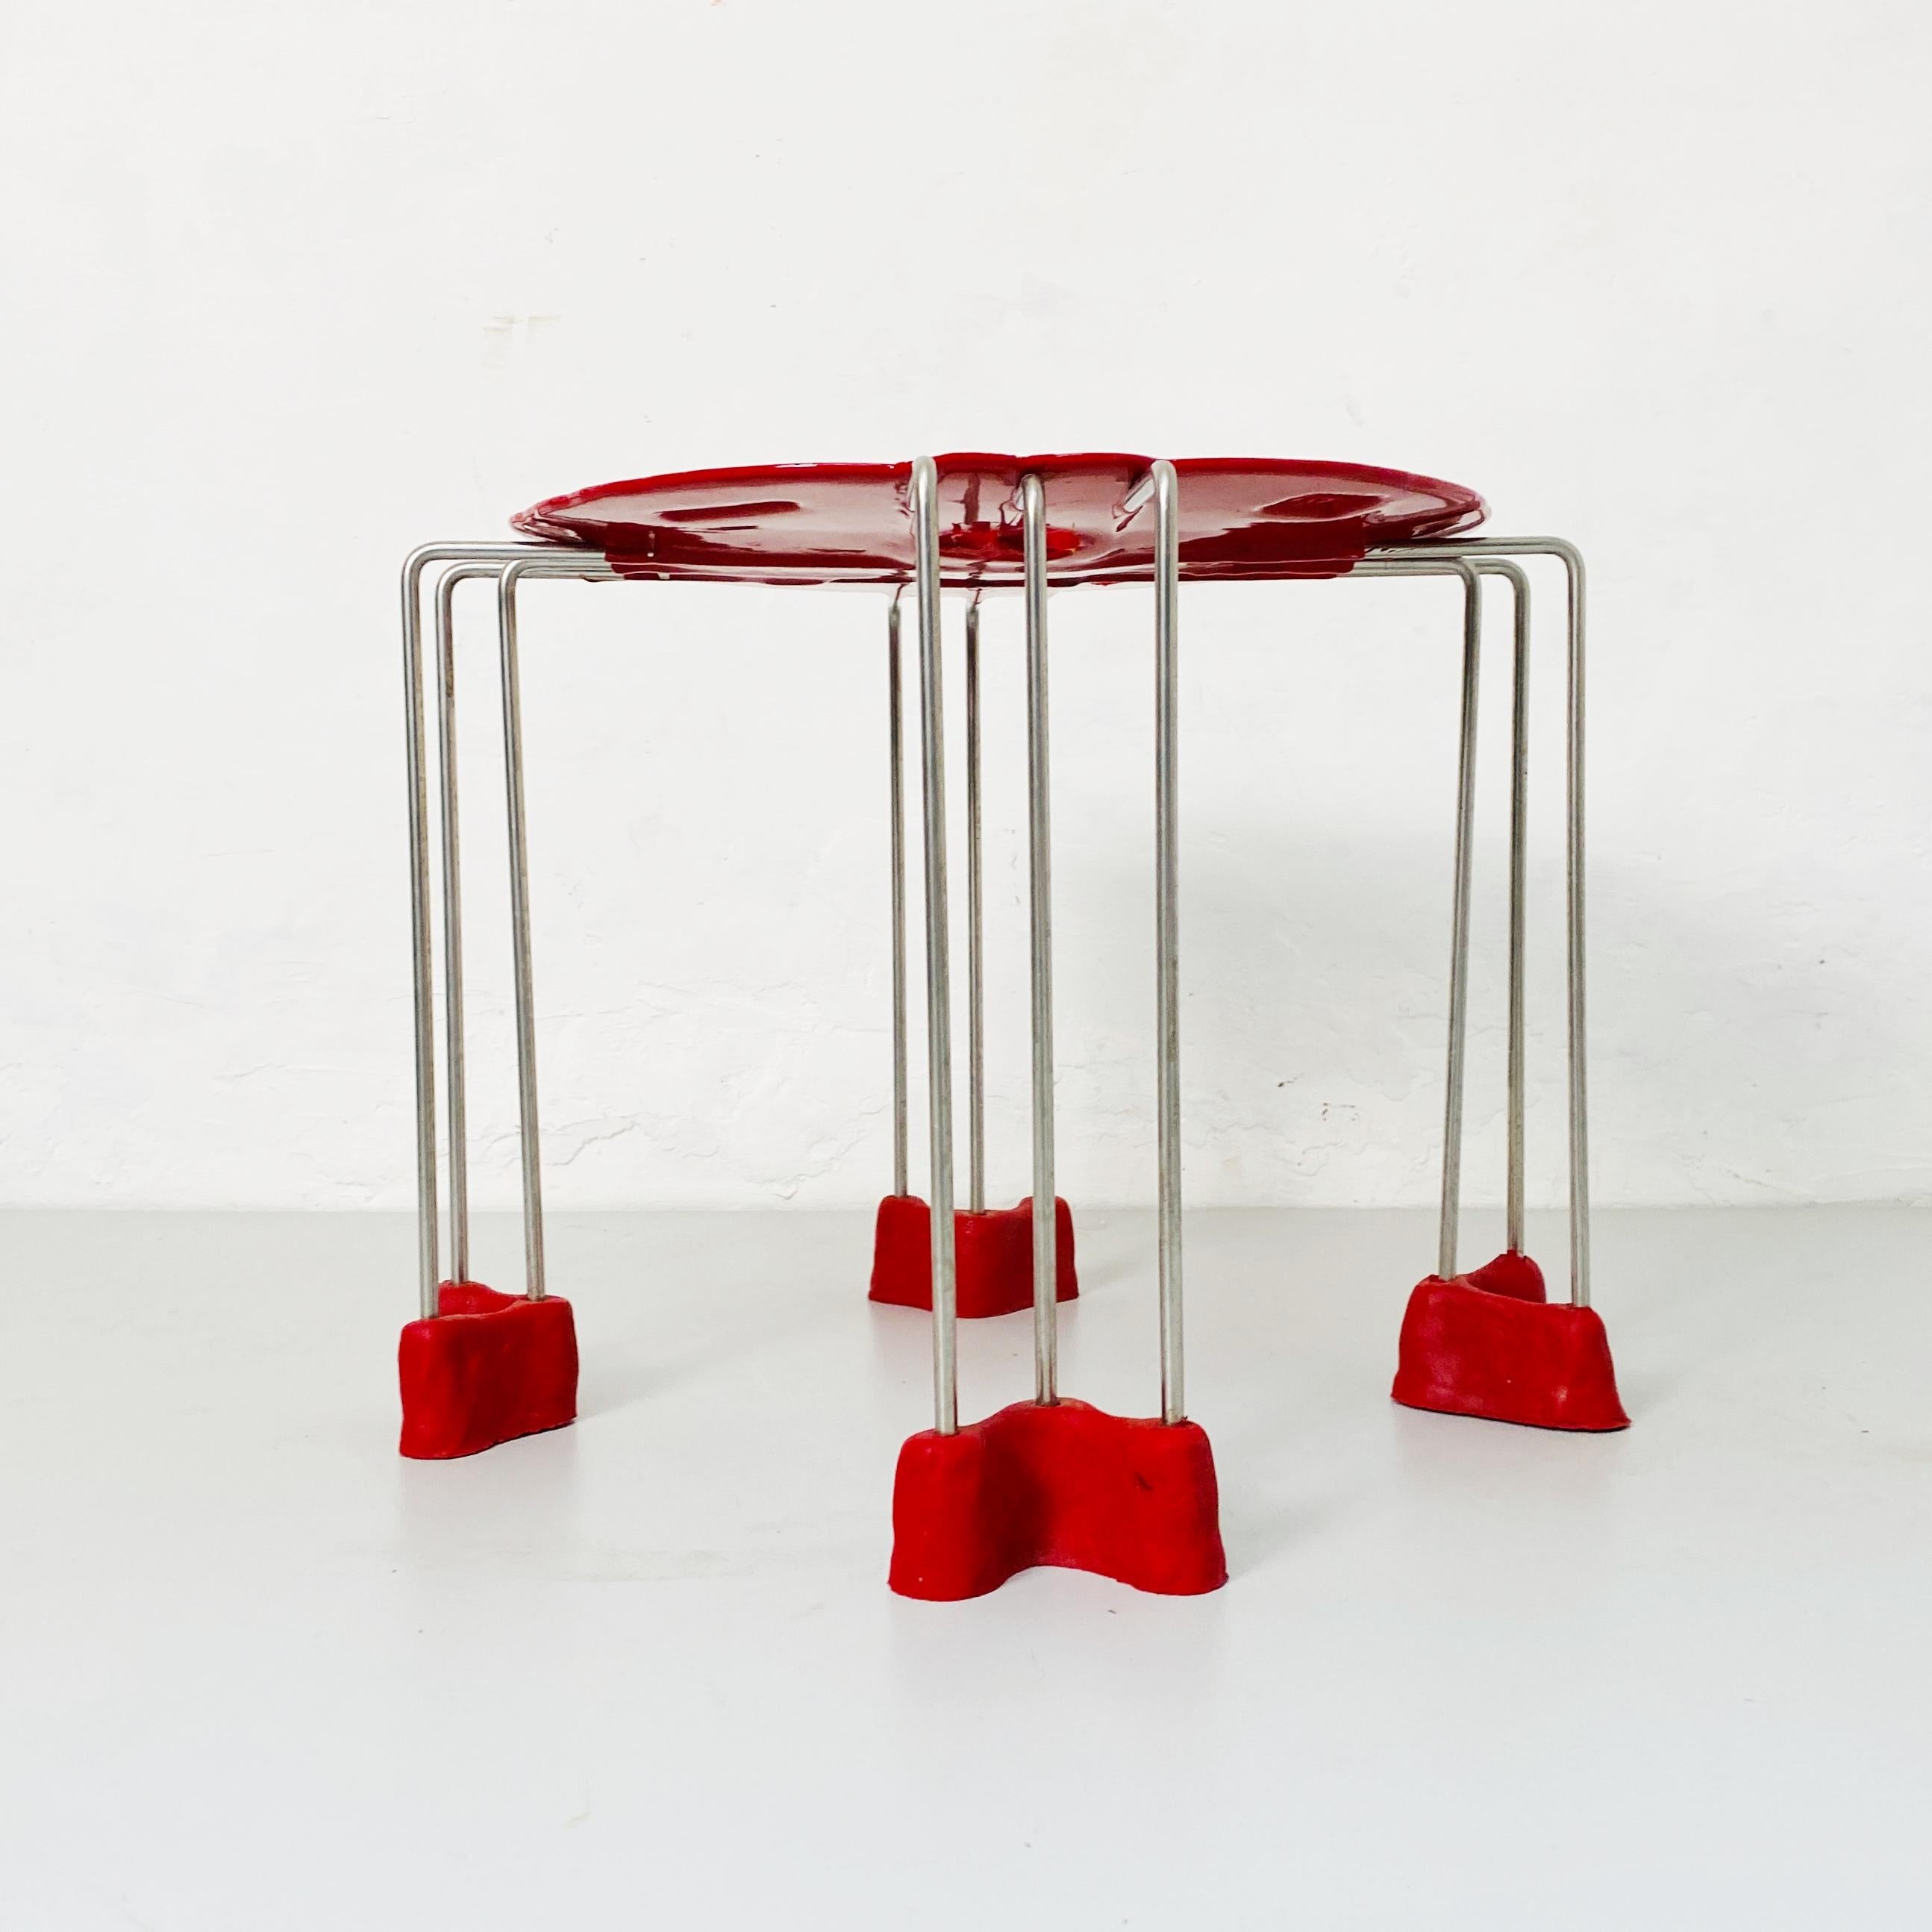 Italian Modern Triple Play Resin Stool by Gaetano Pesce for Fish Design, 2000s For Sale 1